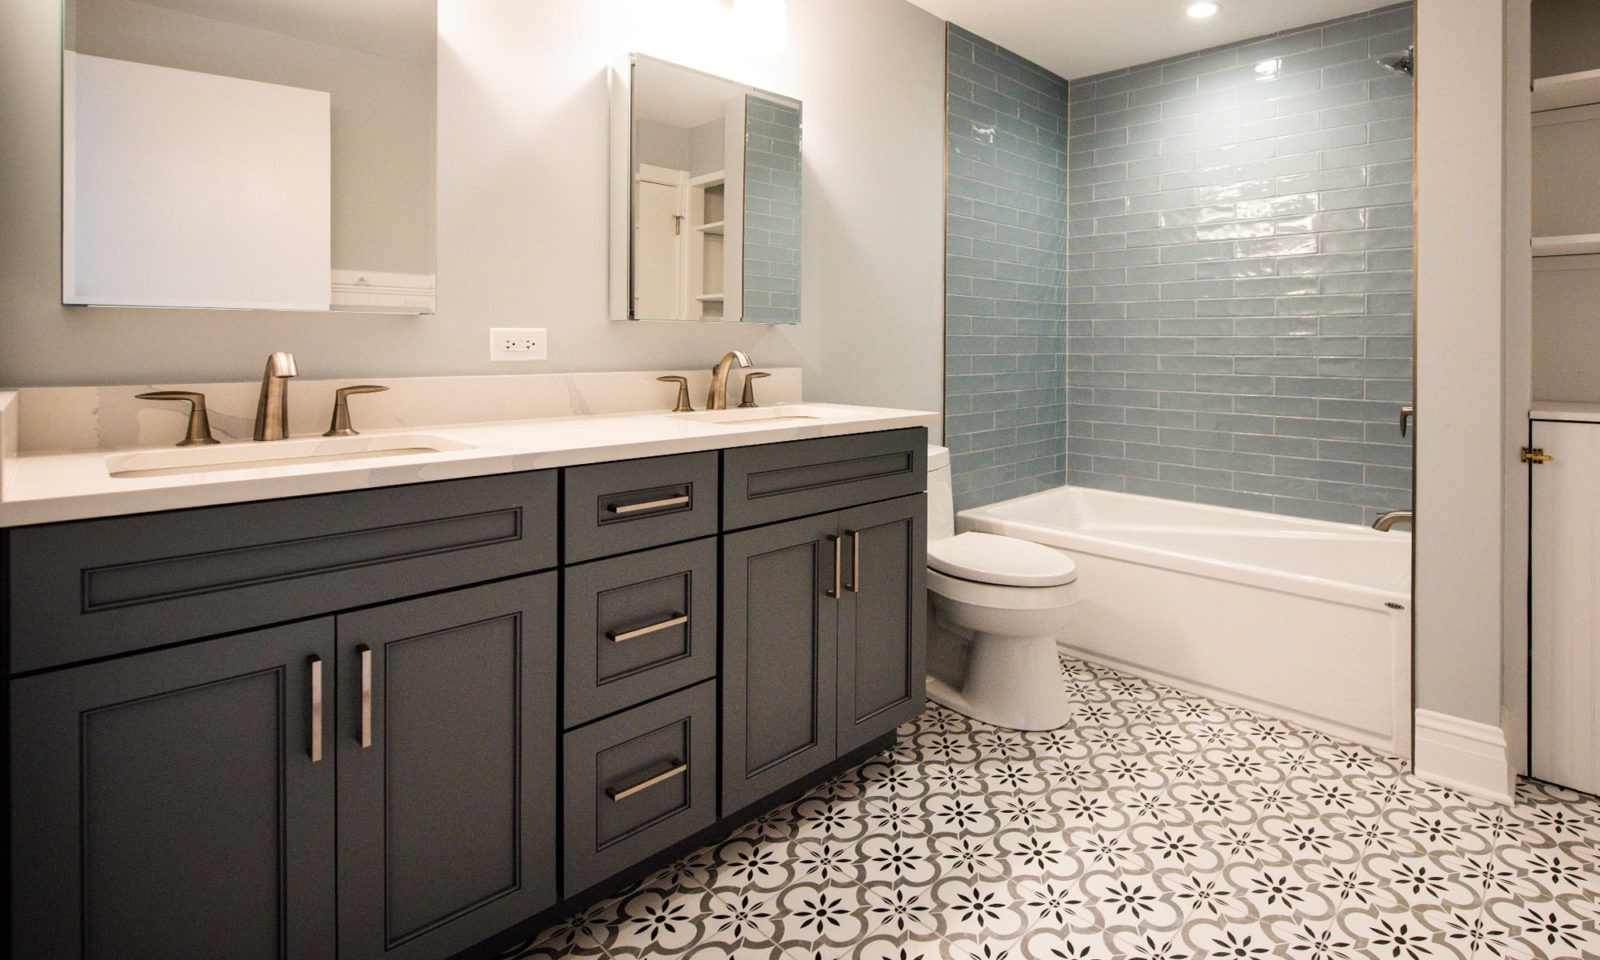 Newly renovated bathroom with designed tile flooring and statement dark sink cabinets